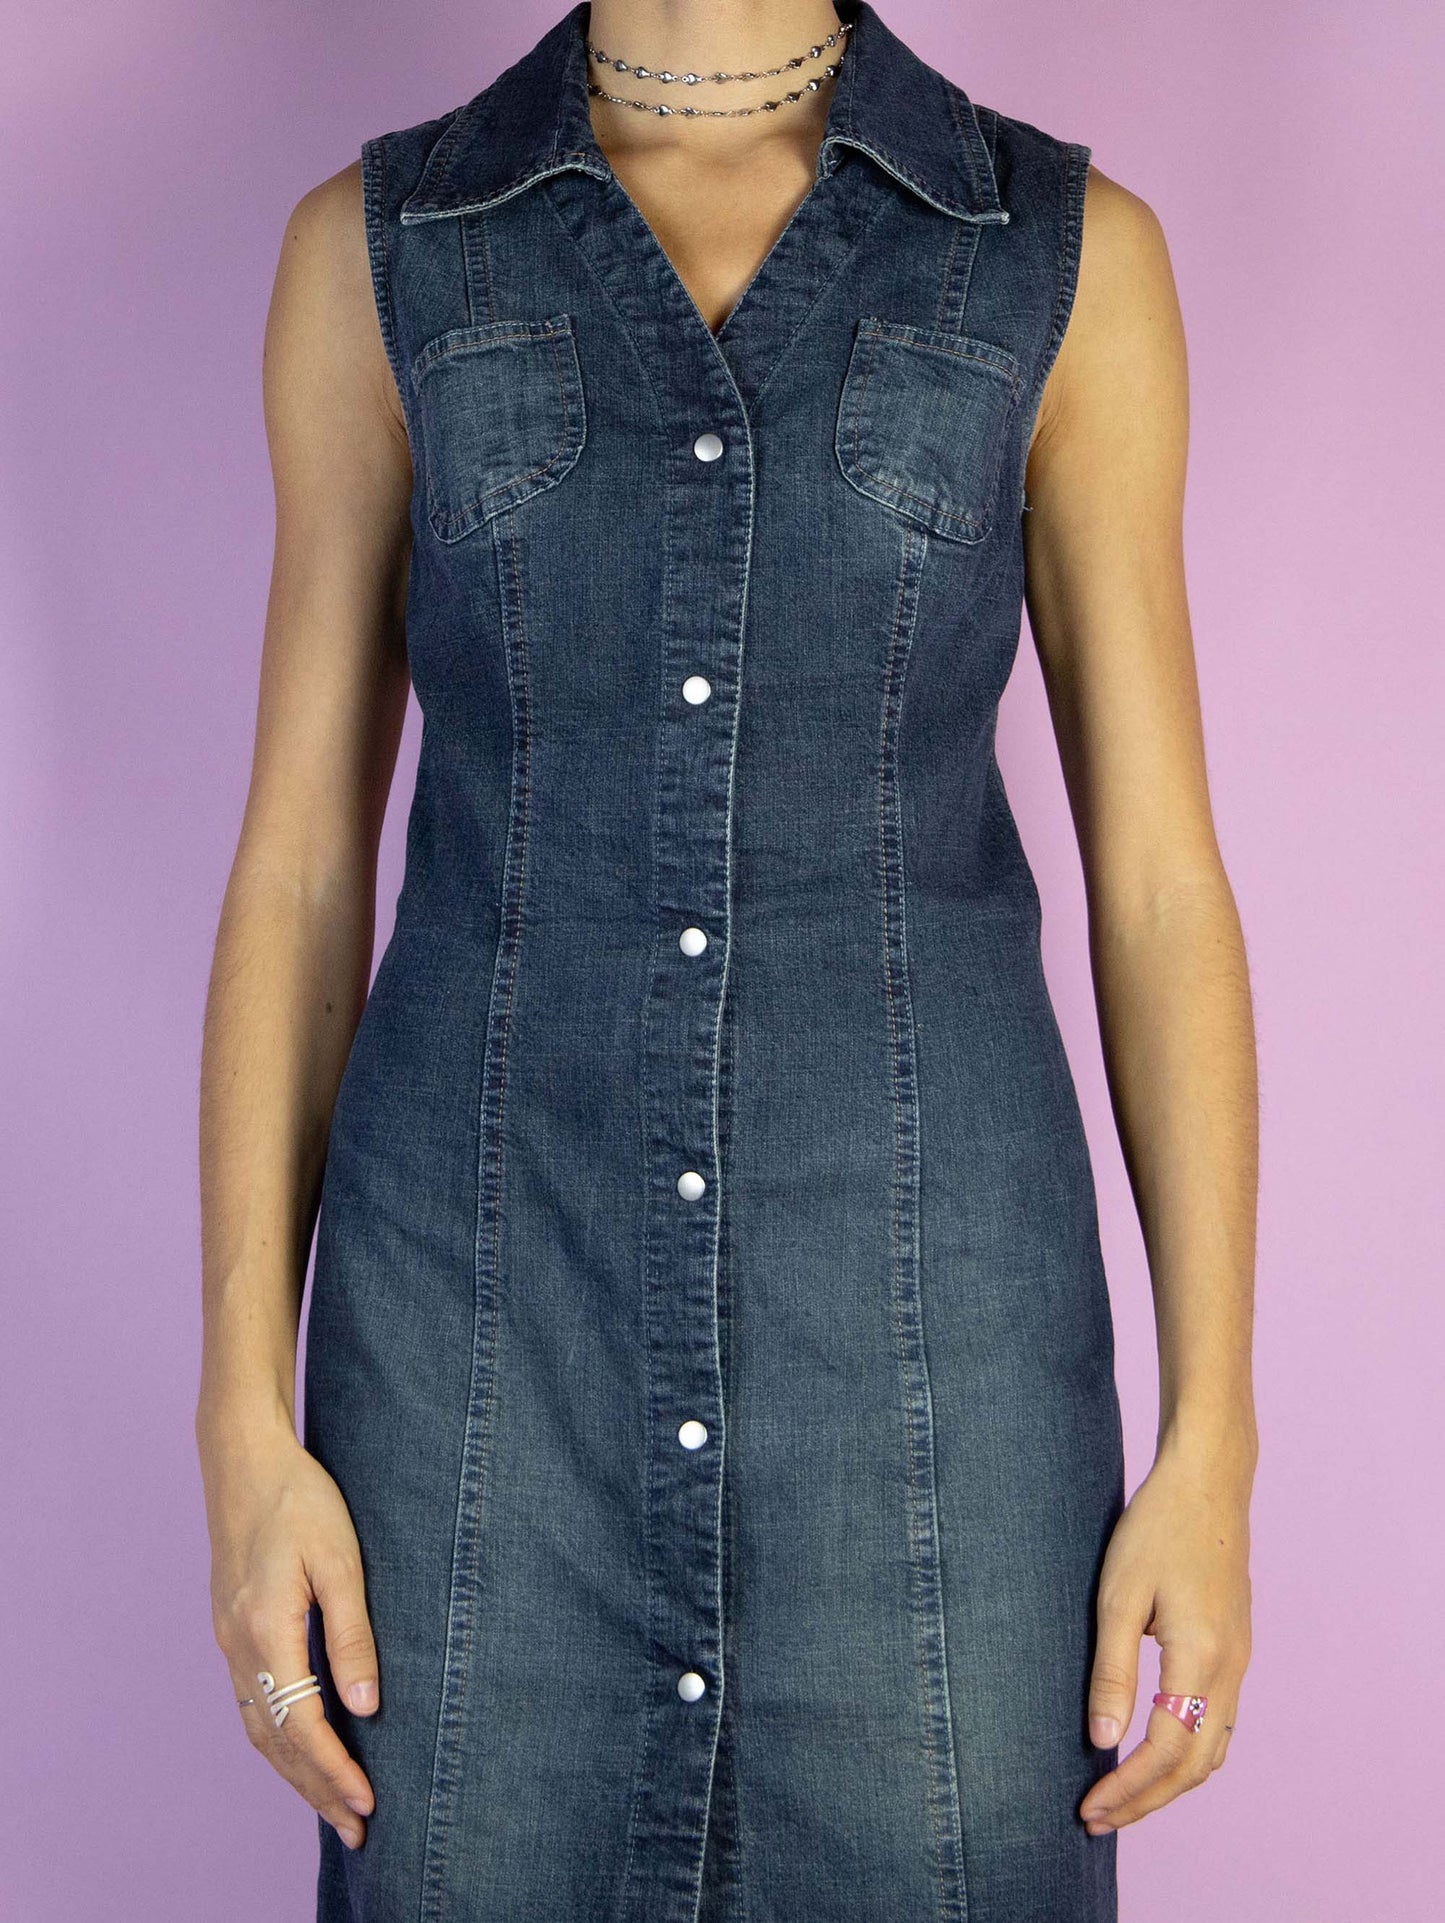 The Y2K Button Denim Midi Dress is a vintage slightly stretchy blue sleeveless dress with a collar and button closure. Cyber streetwear 2000s jean maxi dress.